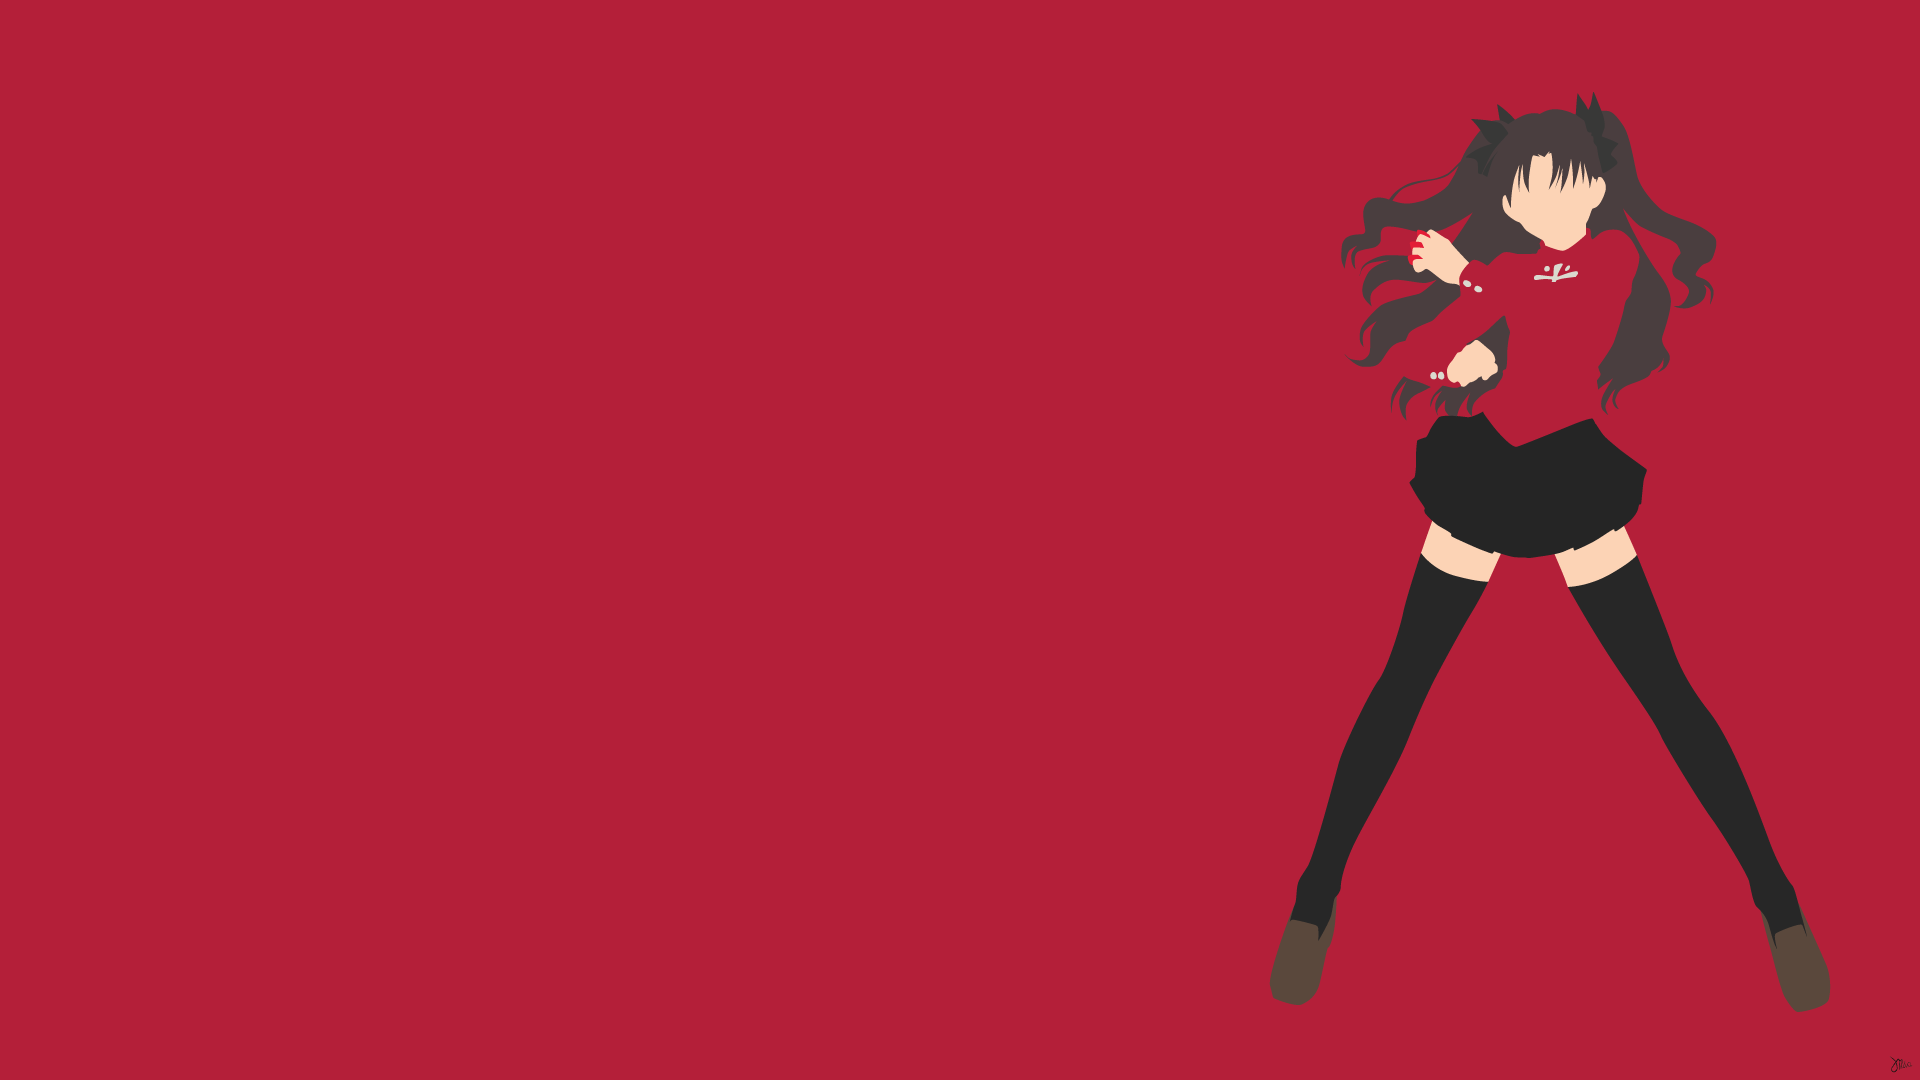 published on july 16 2015 in 8 minimalist fate stay night wallpaper